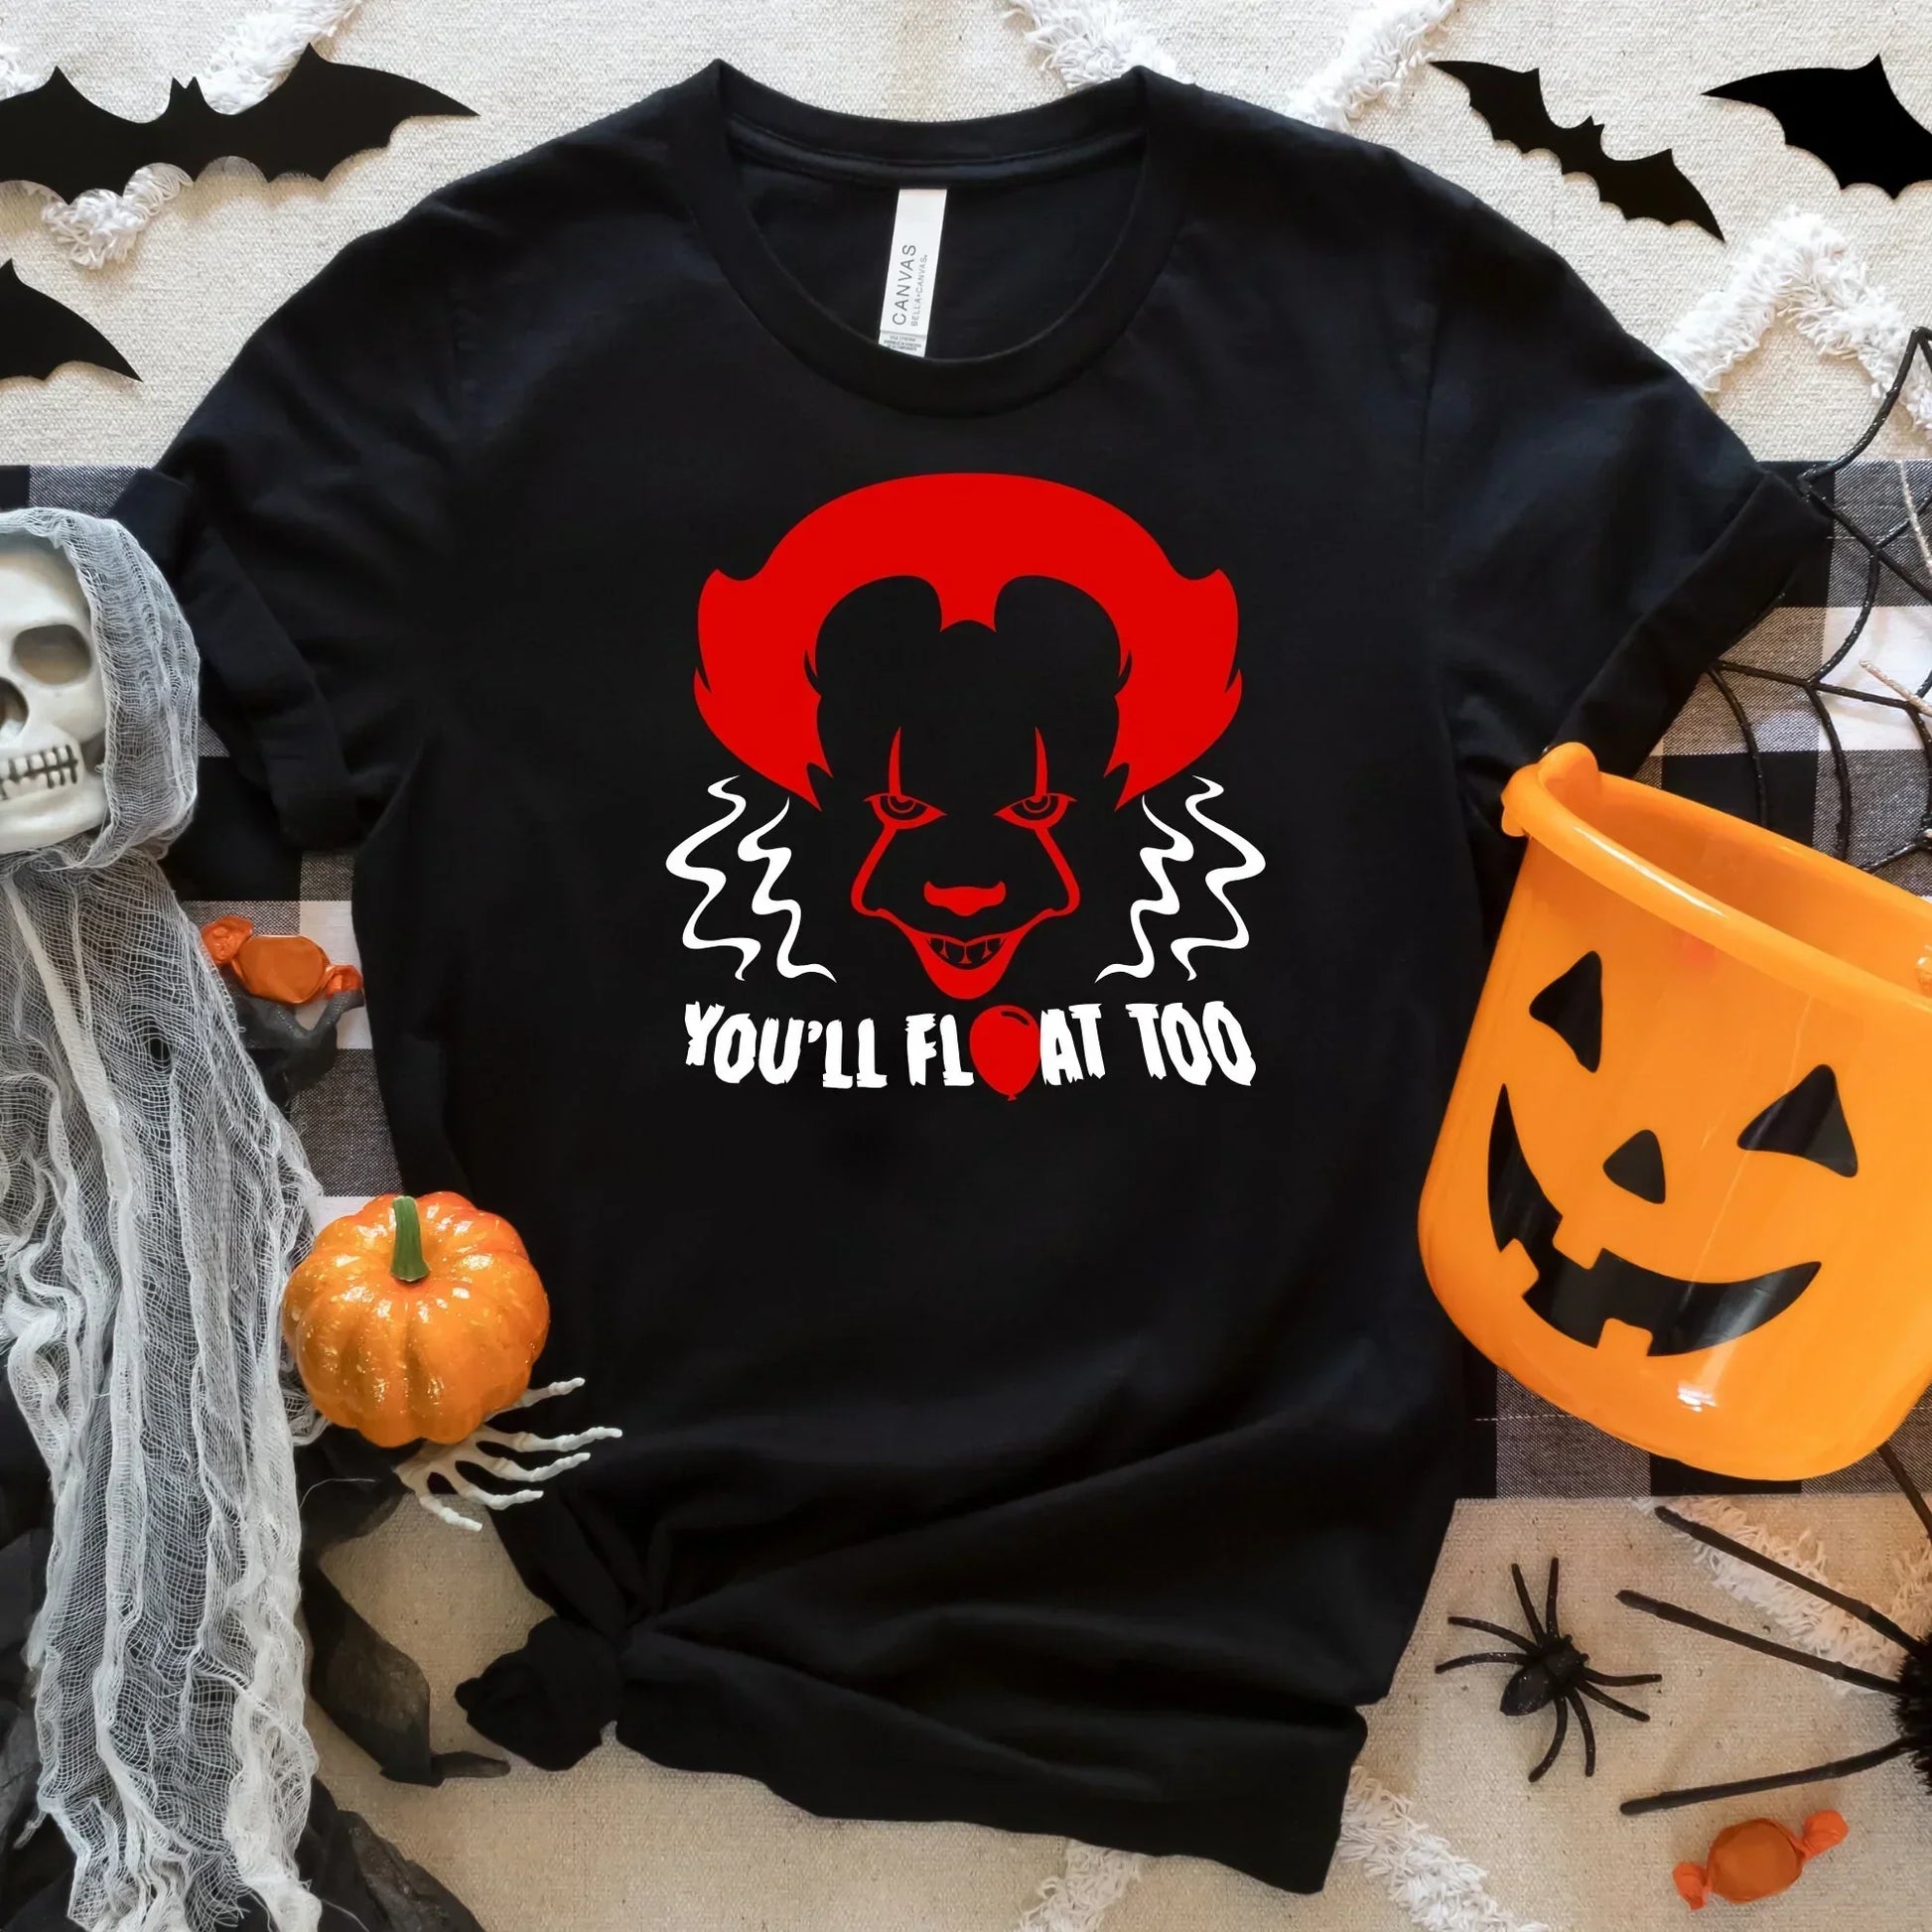 Horror Movie Sweatshirt, Pennywise Shirt, IT Tshirt, Halloween Crewneck, Trick or Treat, Cute Party T-Shirt, Gift for Her, Gift for Him